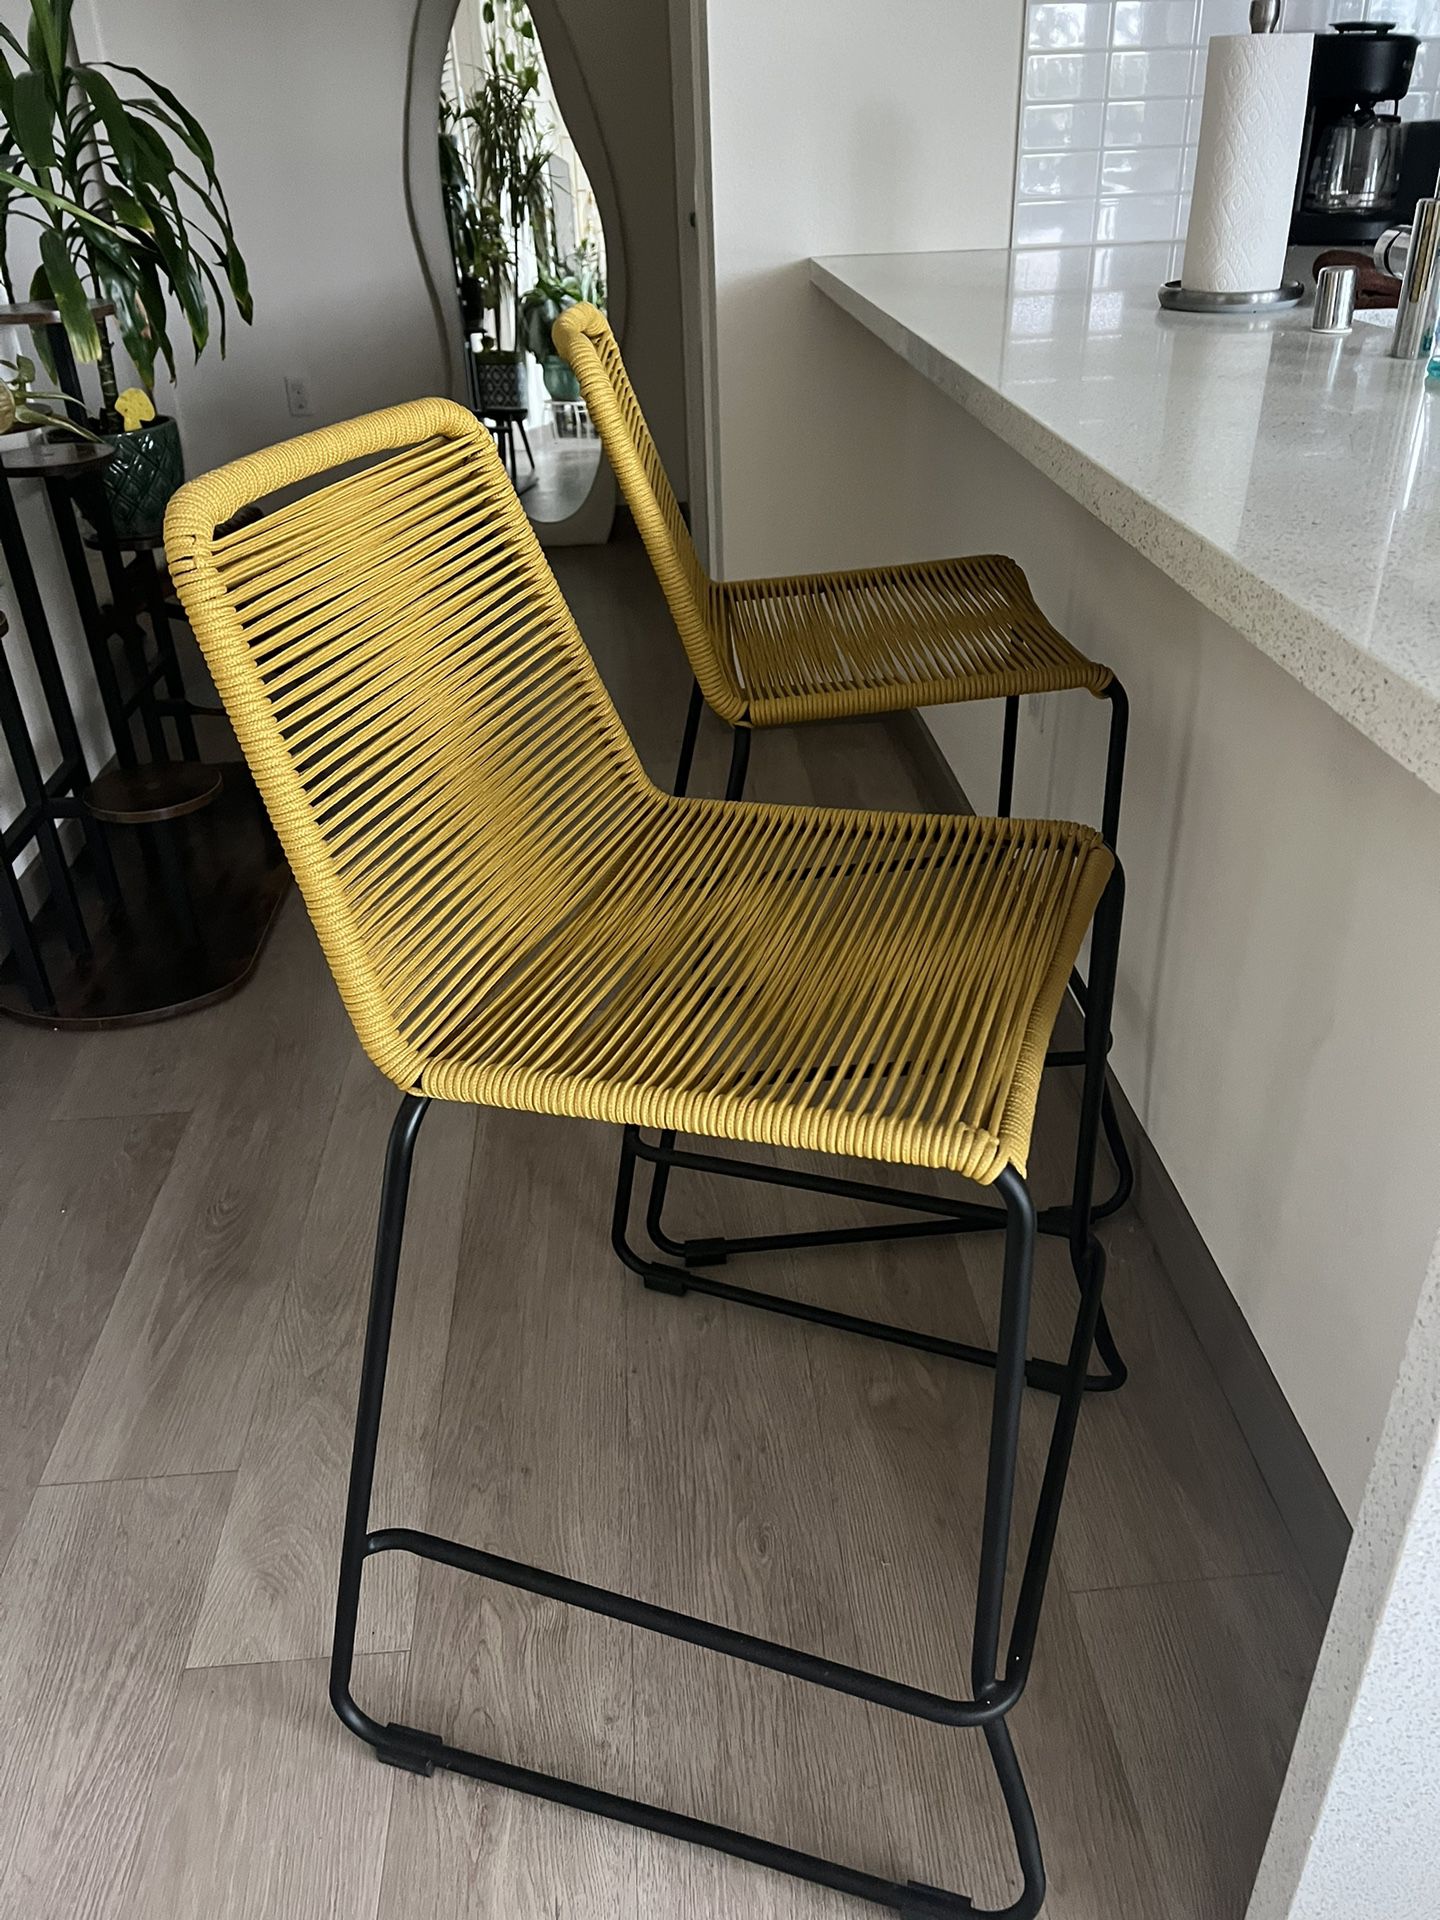 Two All Modern Patio String Chairs